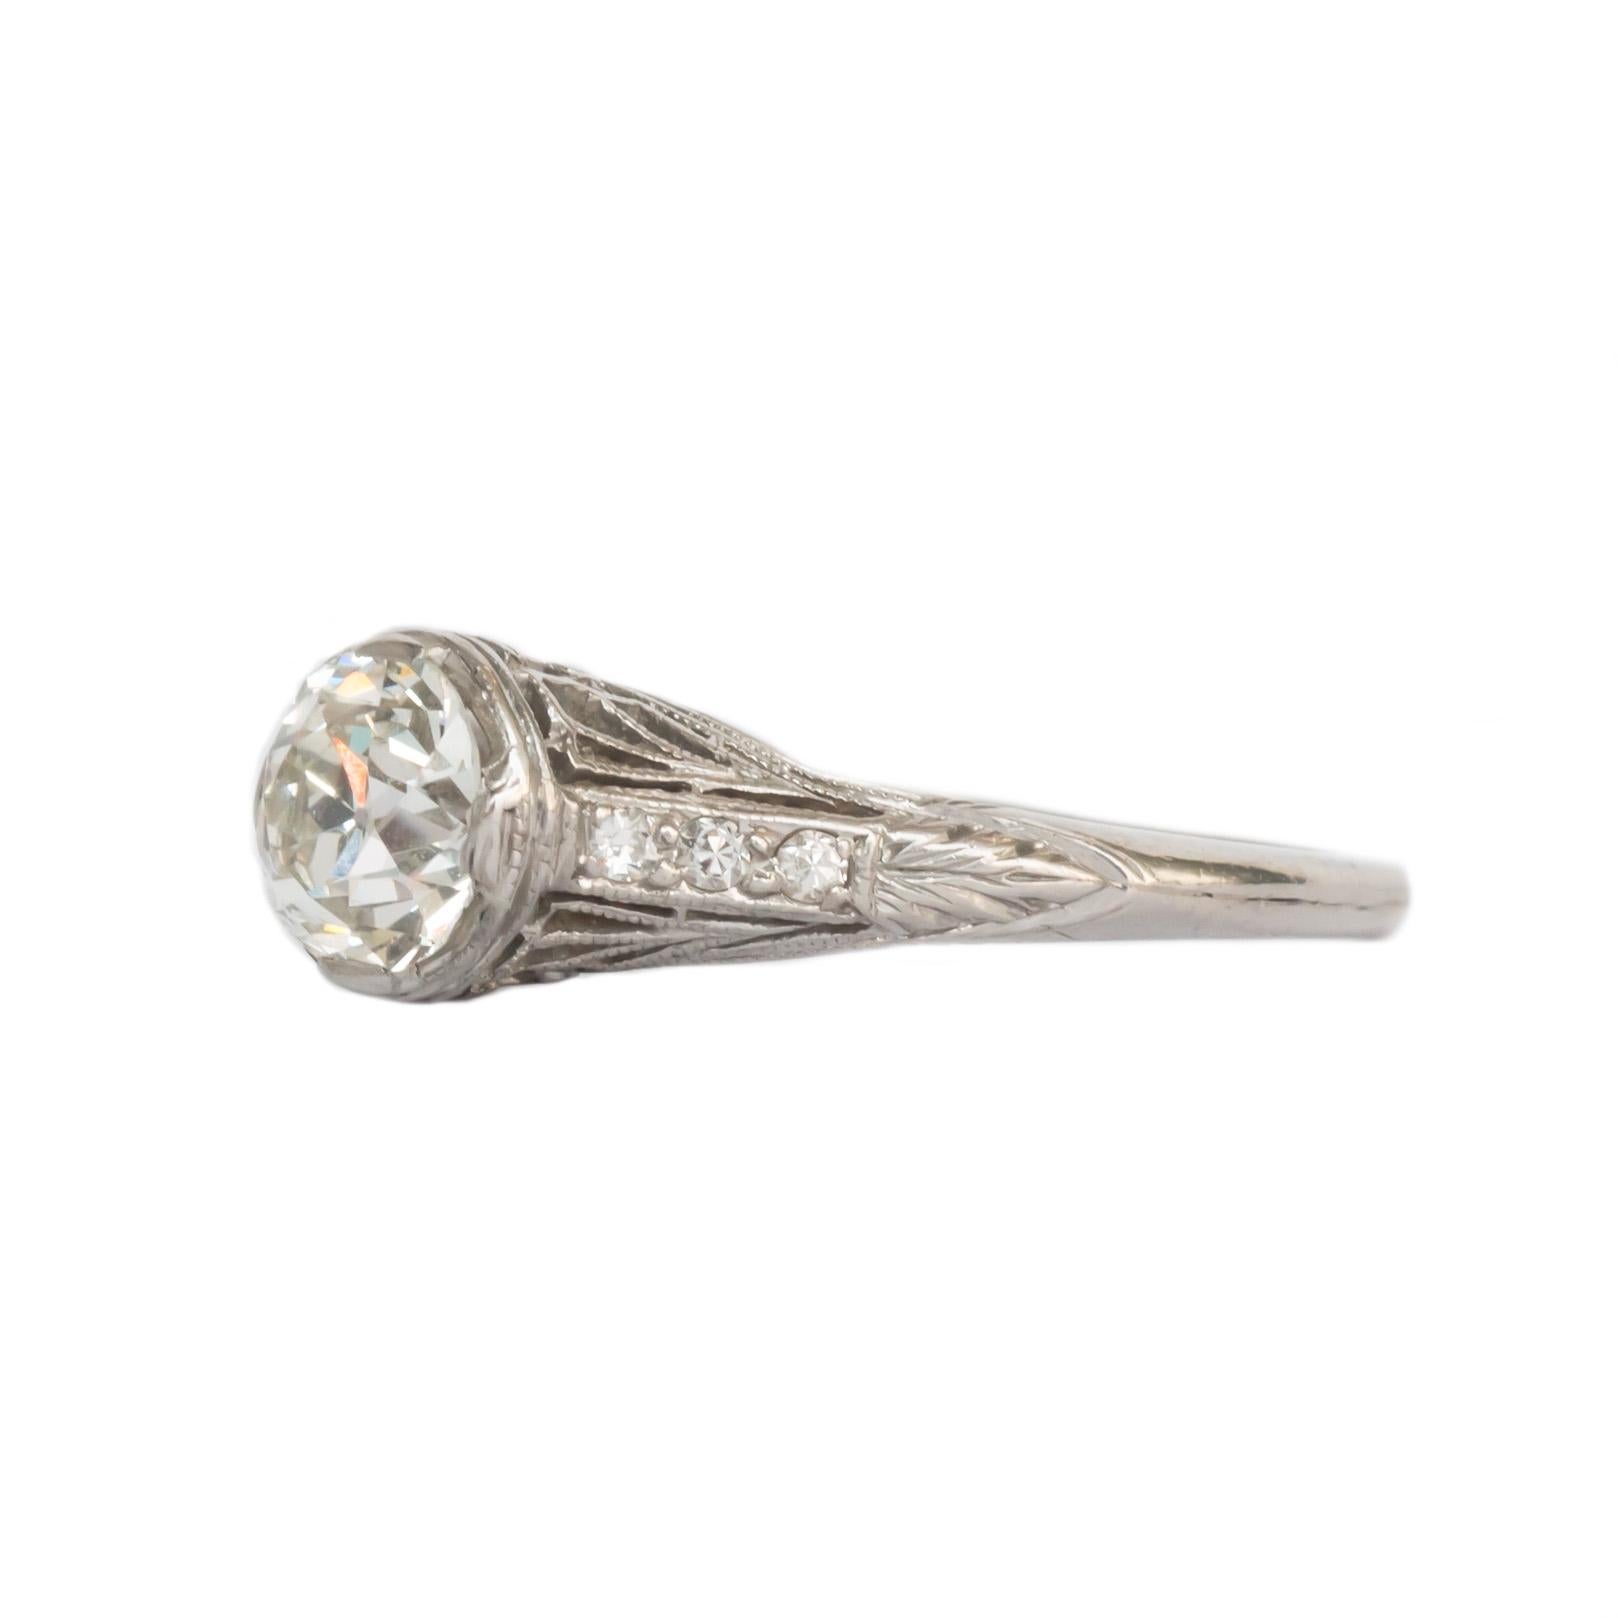 Item Details: 
Ring Size: 5.75
Metal Type: PLATINUM [Hallmarked and Tested]
Weight: 2.9 grams

Center Stone Details:
GIA REPORT #5202544941
Weight: .75 carat
Cut: Old European Brilliant
Color: J 
Clarity: VS1

Side Stone Details: 
Cut: Old European